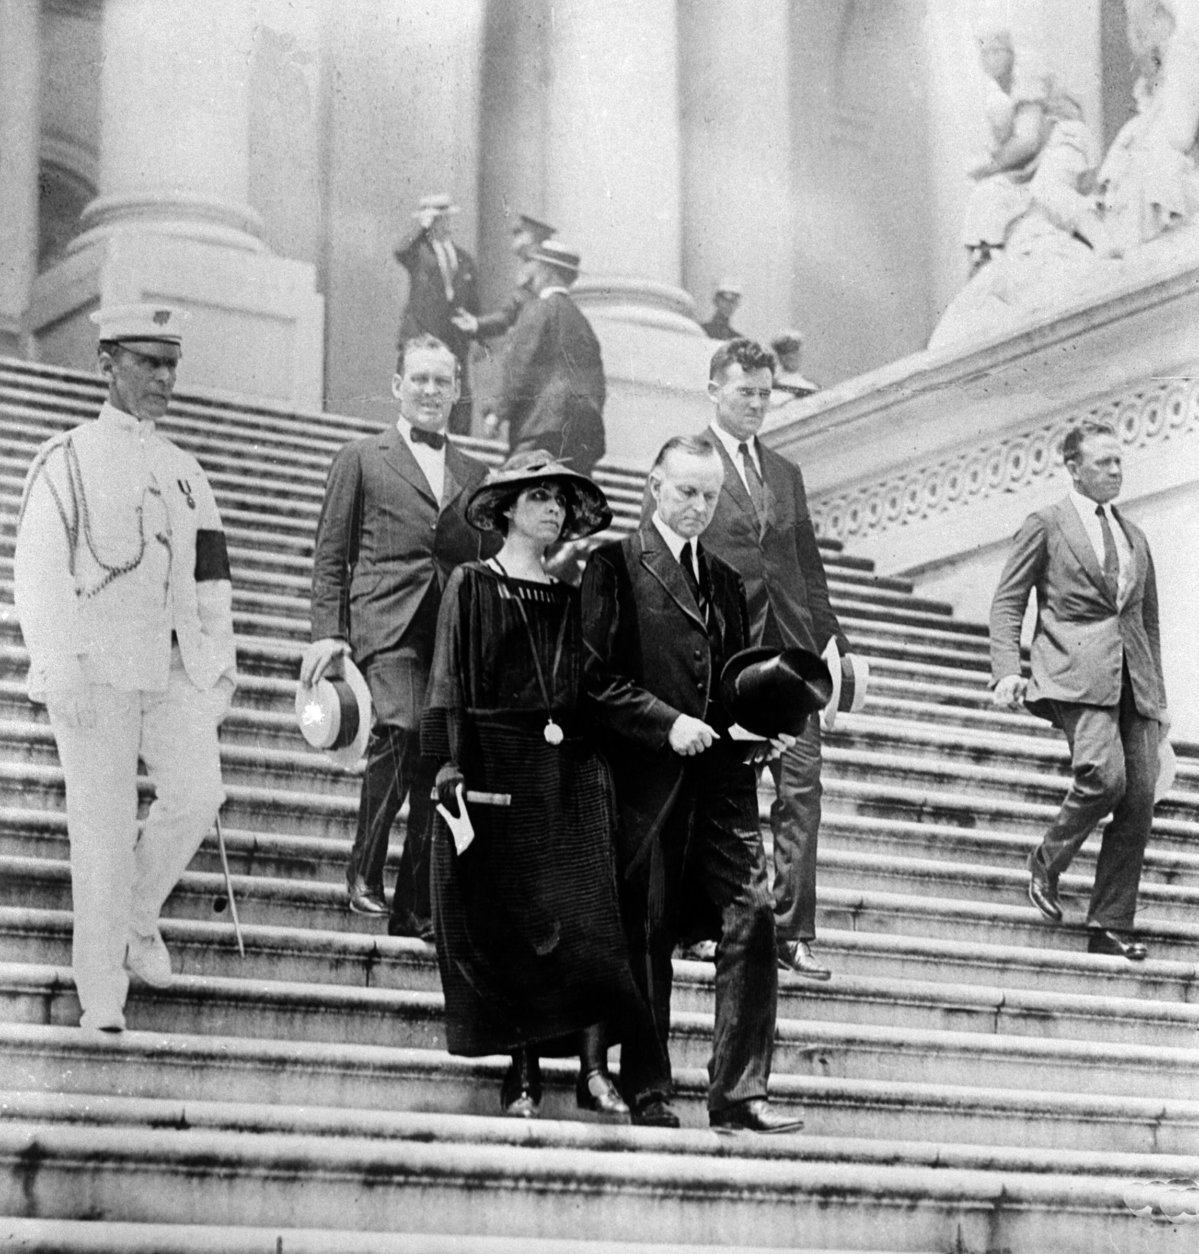 <p>In 1923, the 29th president of the United States, Warren G. Harding, died in San Francisco; Vice President Calvin Coolidge became president.</p>
<p>U.S. President Calvin Coolidge, right foreground, and first lady Grace Coolidge, left, attend the viewing for the late President Warren G. Harding, lying in state, in Washington, D.C., in August 1923. Harding died of a heart attack while in San Francisco, Ca., on Aug. 2. (AP Photo)</p>
<p>&nbsp;</p>
